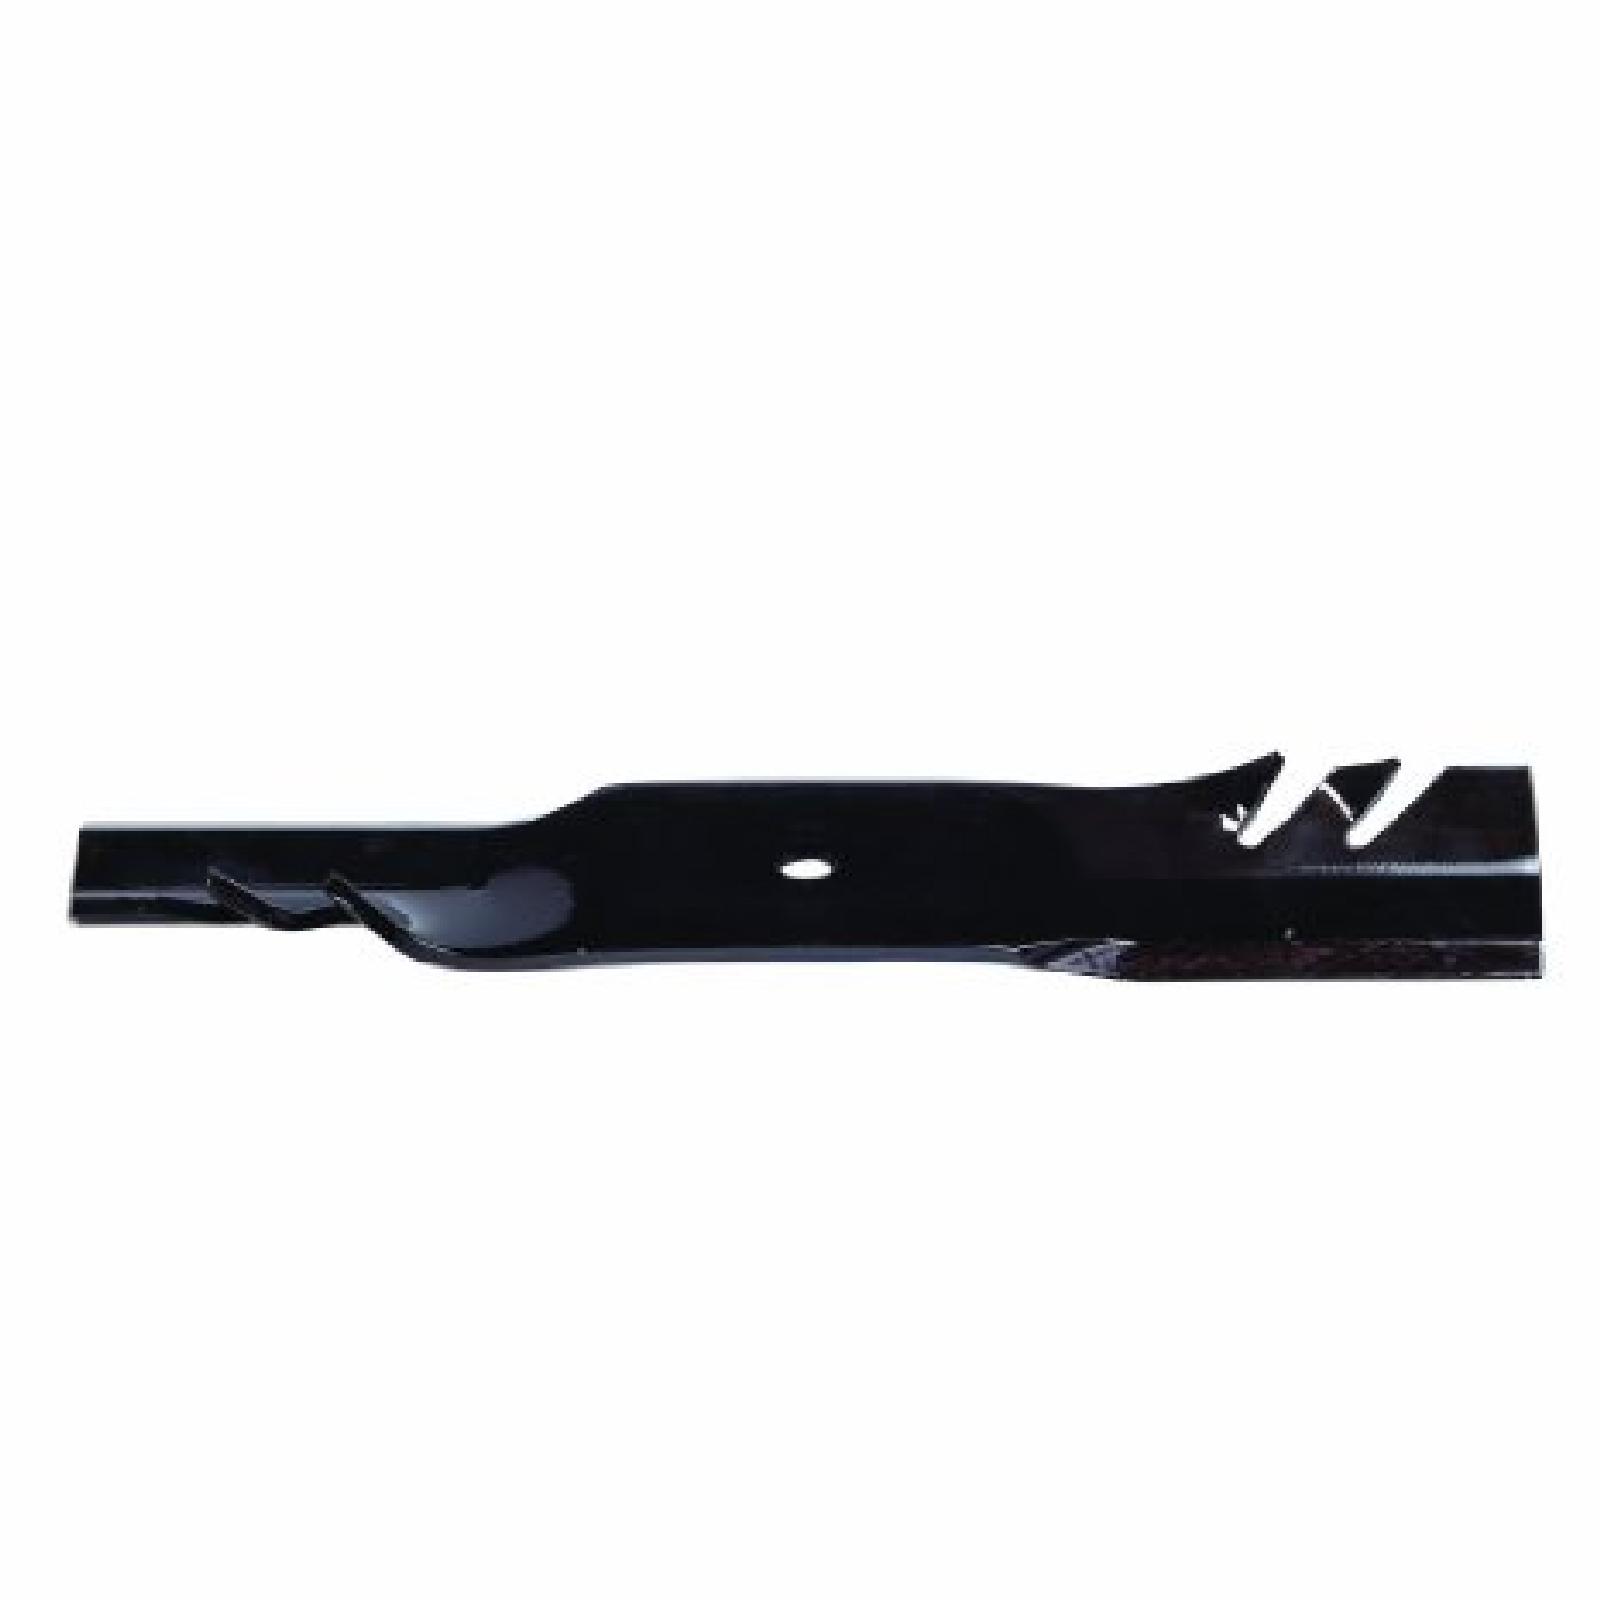 BLADE, GRAVELY, GATOR G6 part# 396-809 by Oregon - Click Image to Close